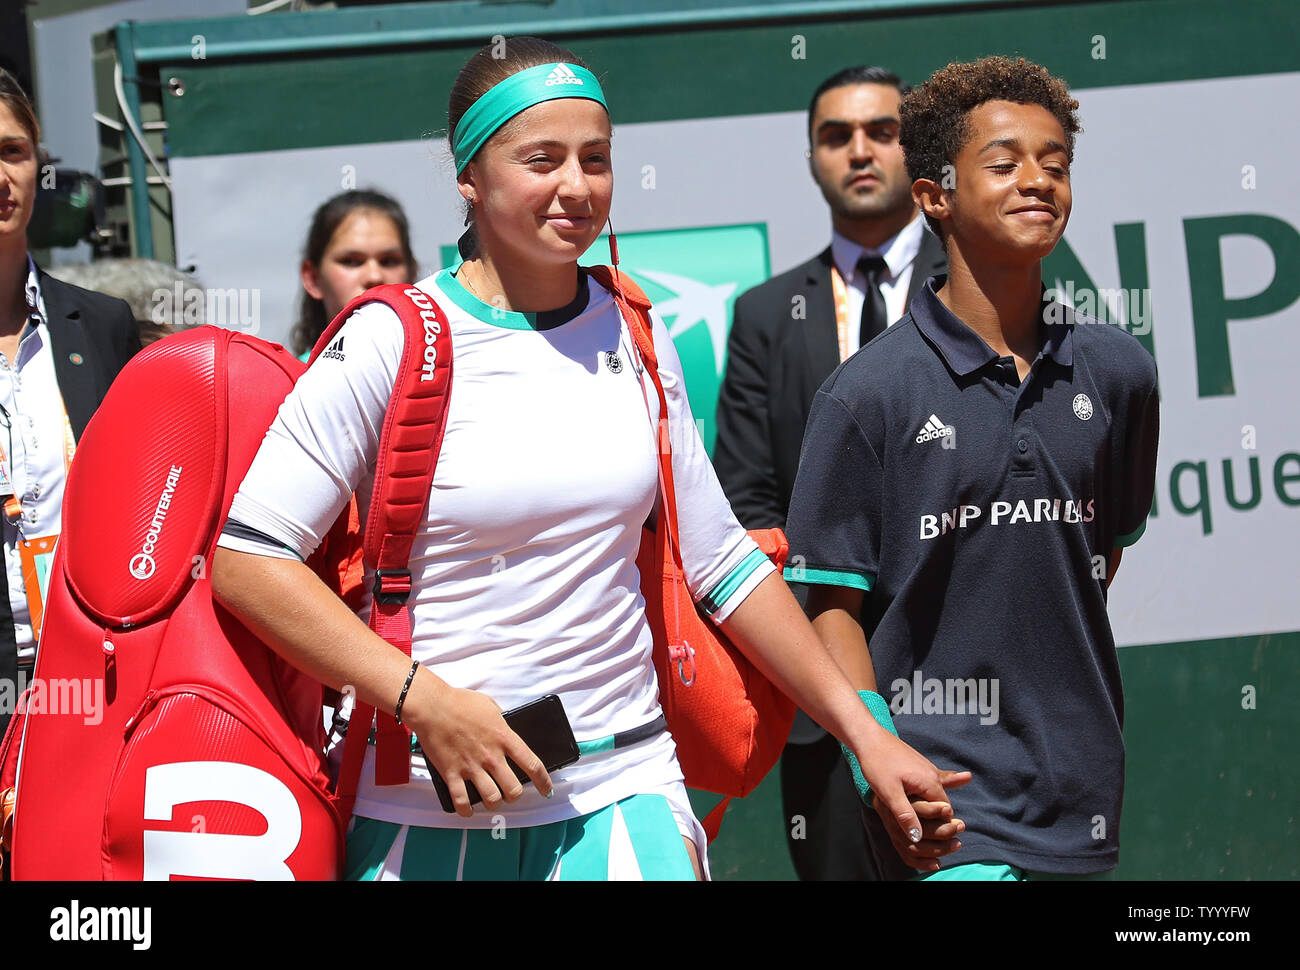 Jelena Ostapenko Of Latvia Enters The Court With A Ball Boy Before Her French Open Women S Final Match Against Simona Halep Of Romania At Roland Garros In Paris On June 10 17